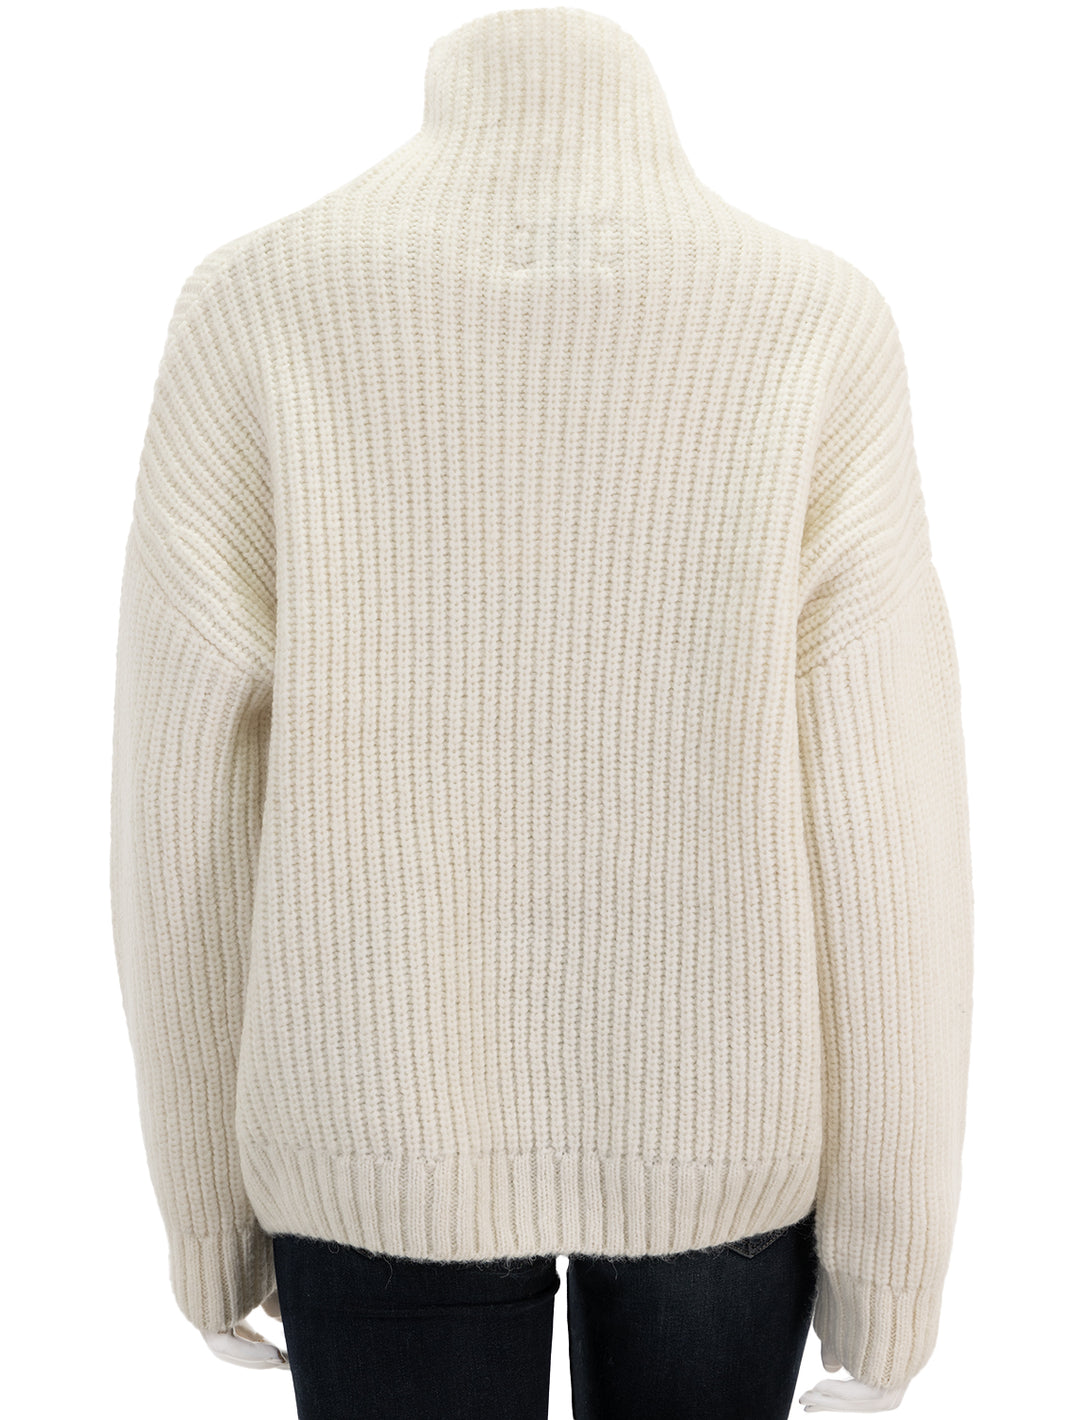 Back view of Anine Bing's sydney sweater in ivory.